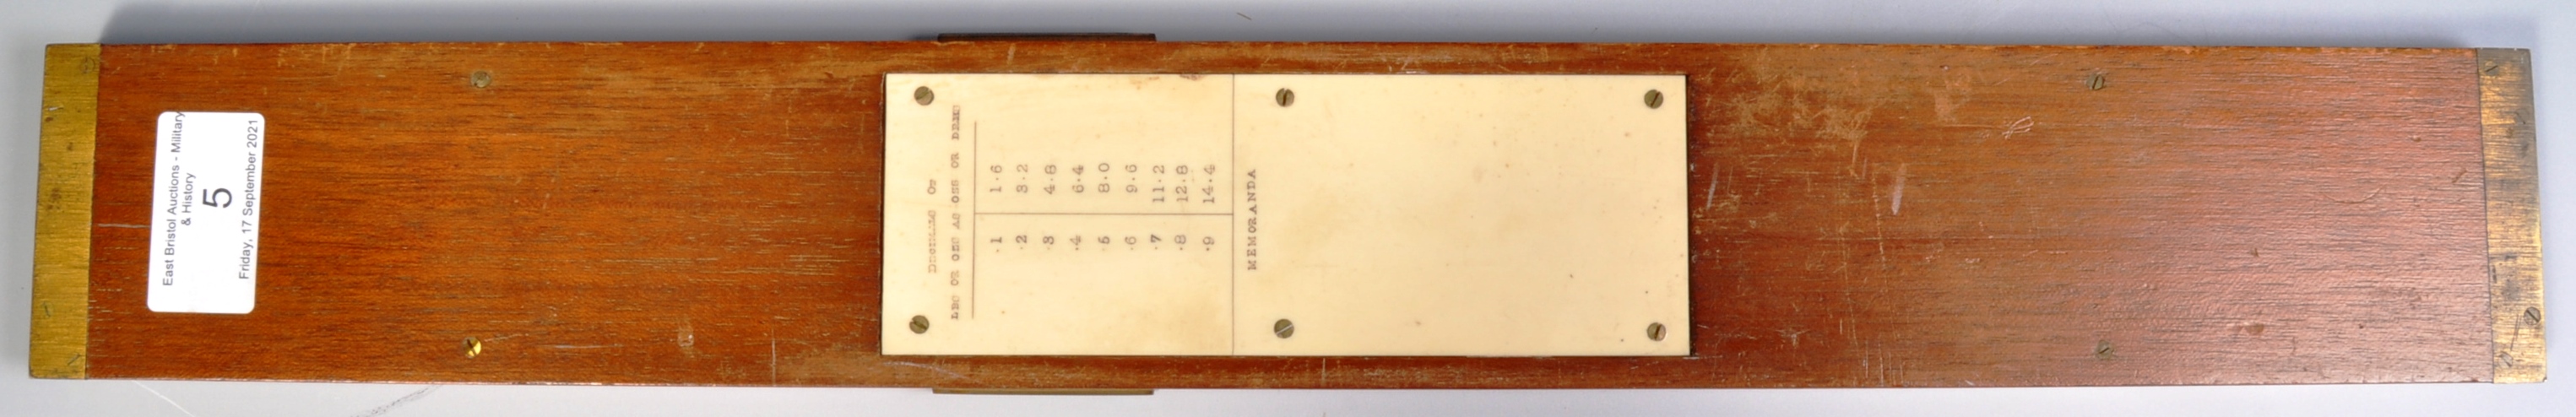 19TH CENTURY CAPTAIN HILL'S VELOCITY SCALE FOR A CANNON - Image 2 of 8